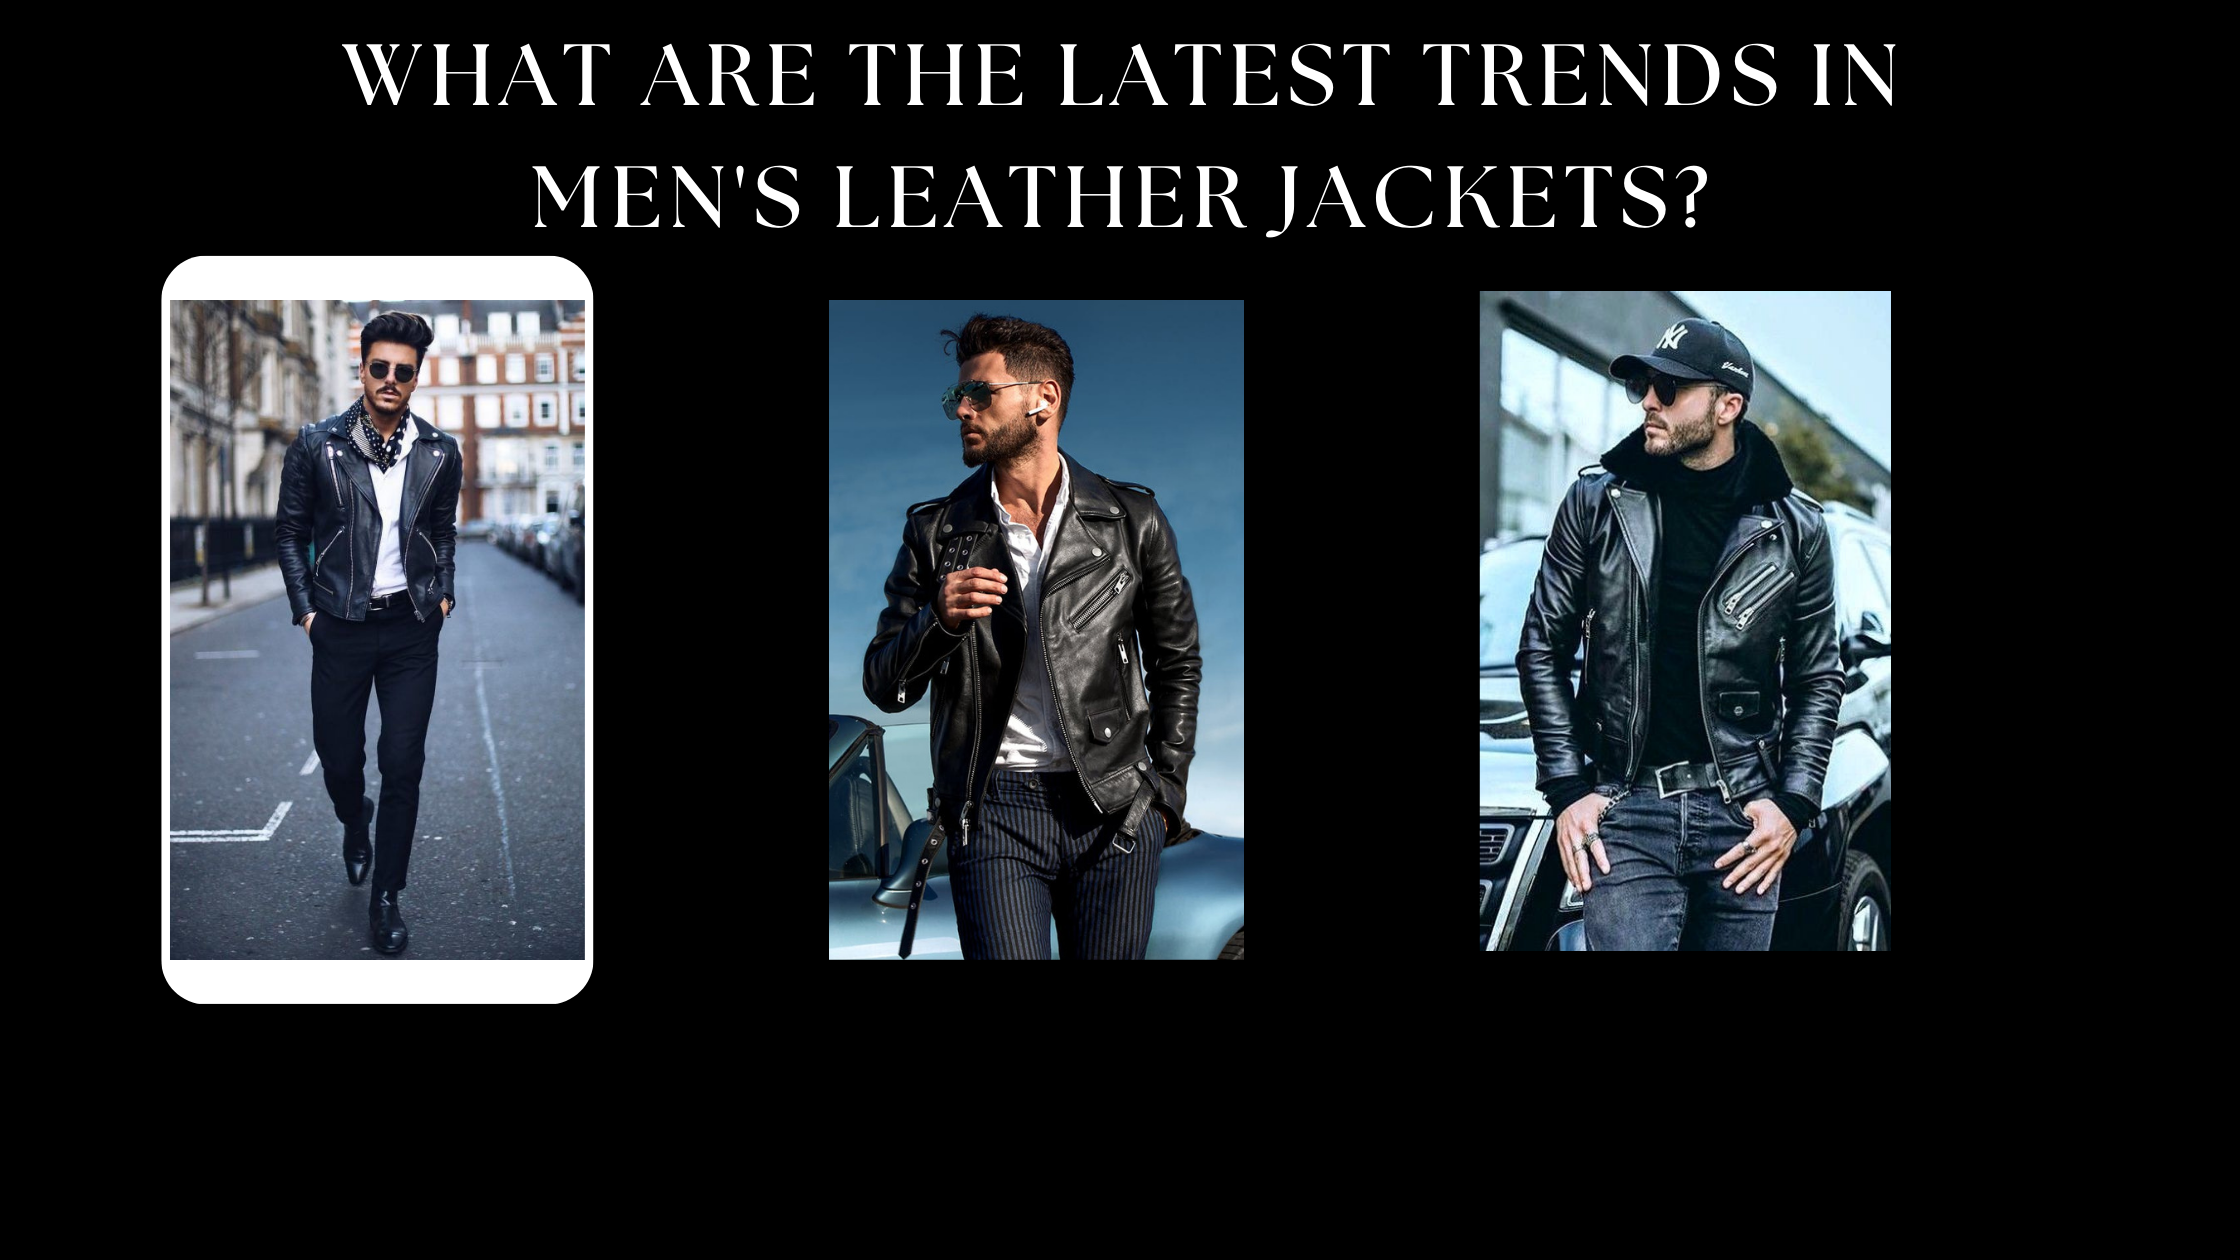 You are currently viewing What are the latest trends in men’s leather jackets?